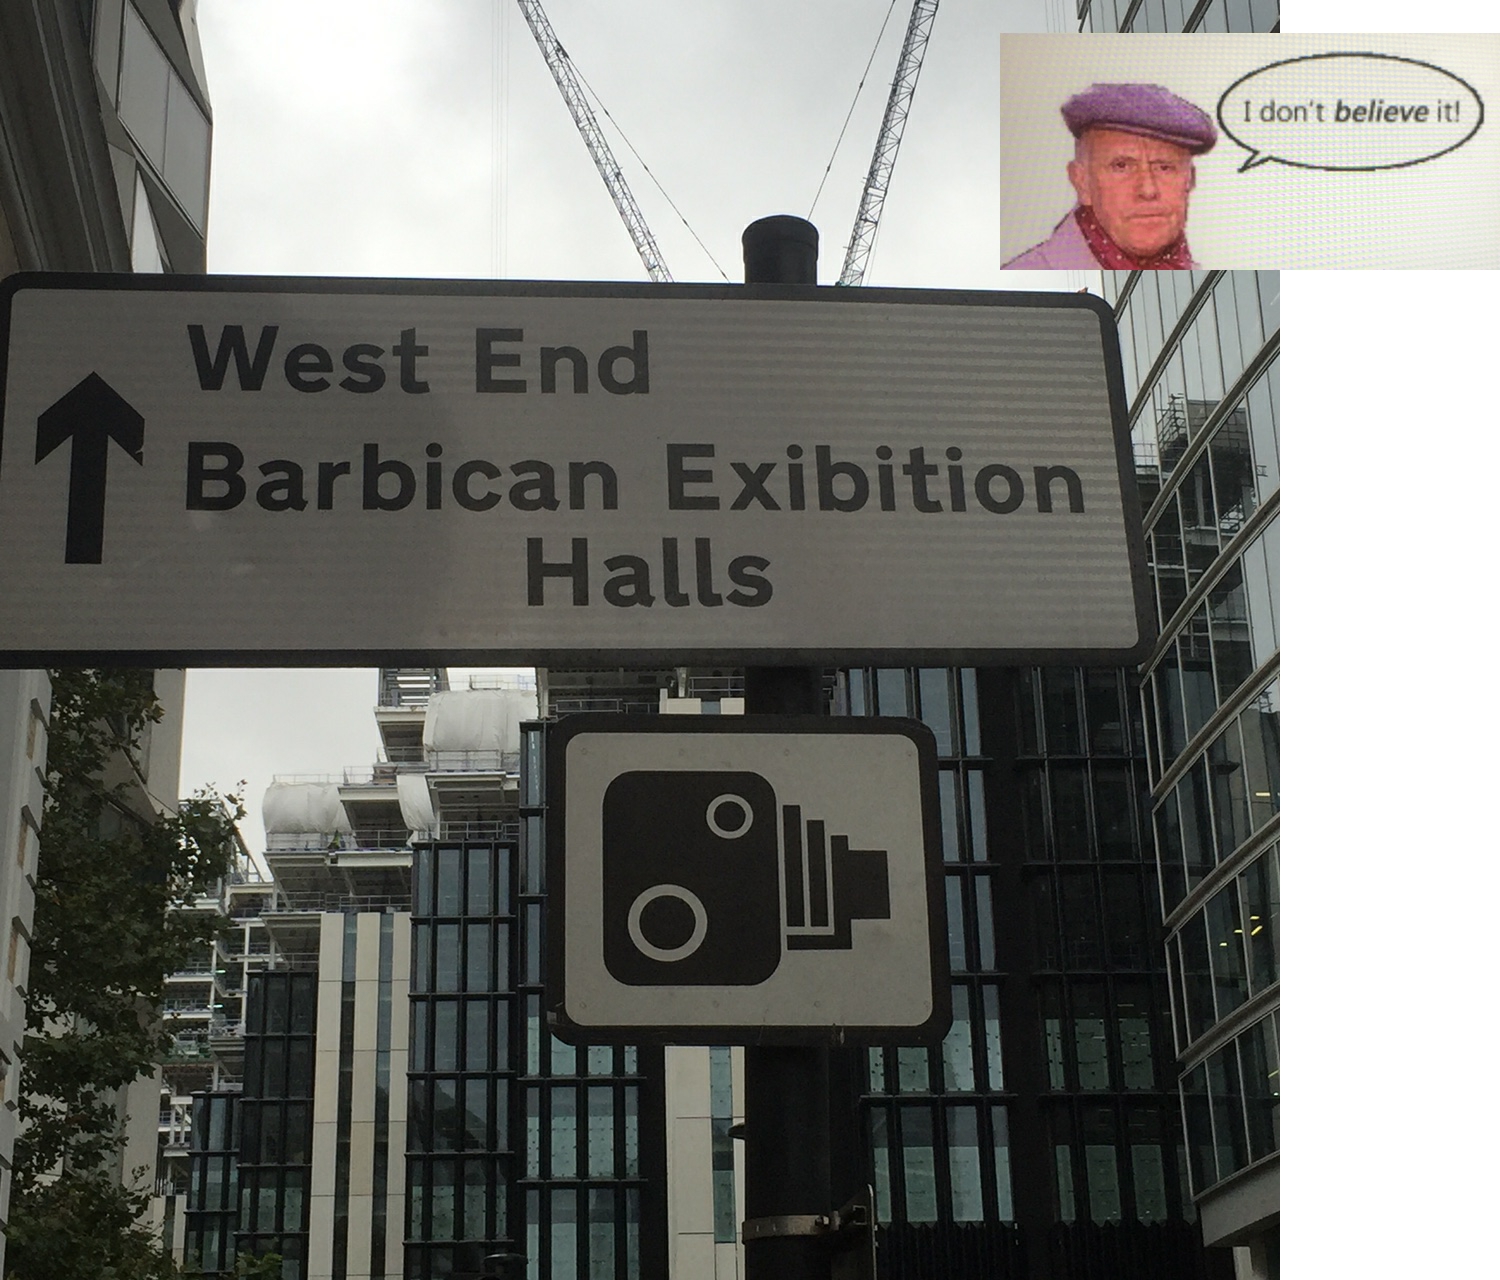 Mispelled sign for "Barbican Exhibtion Halls". The "h" is missing from the workd exhibtion!